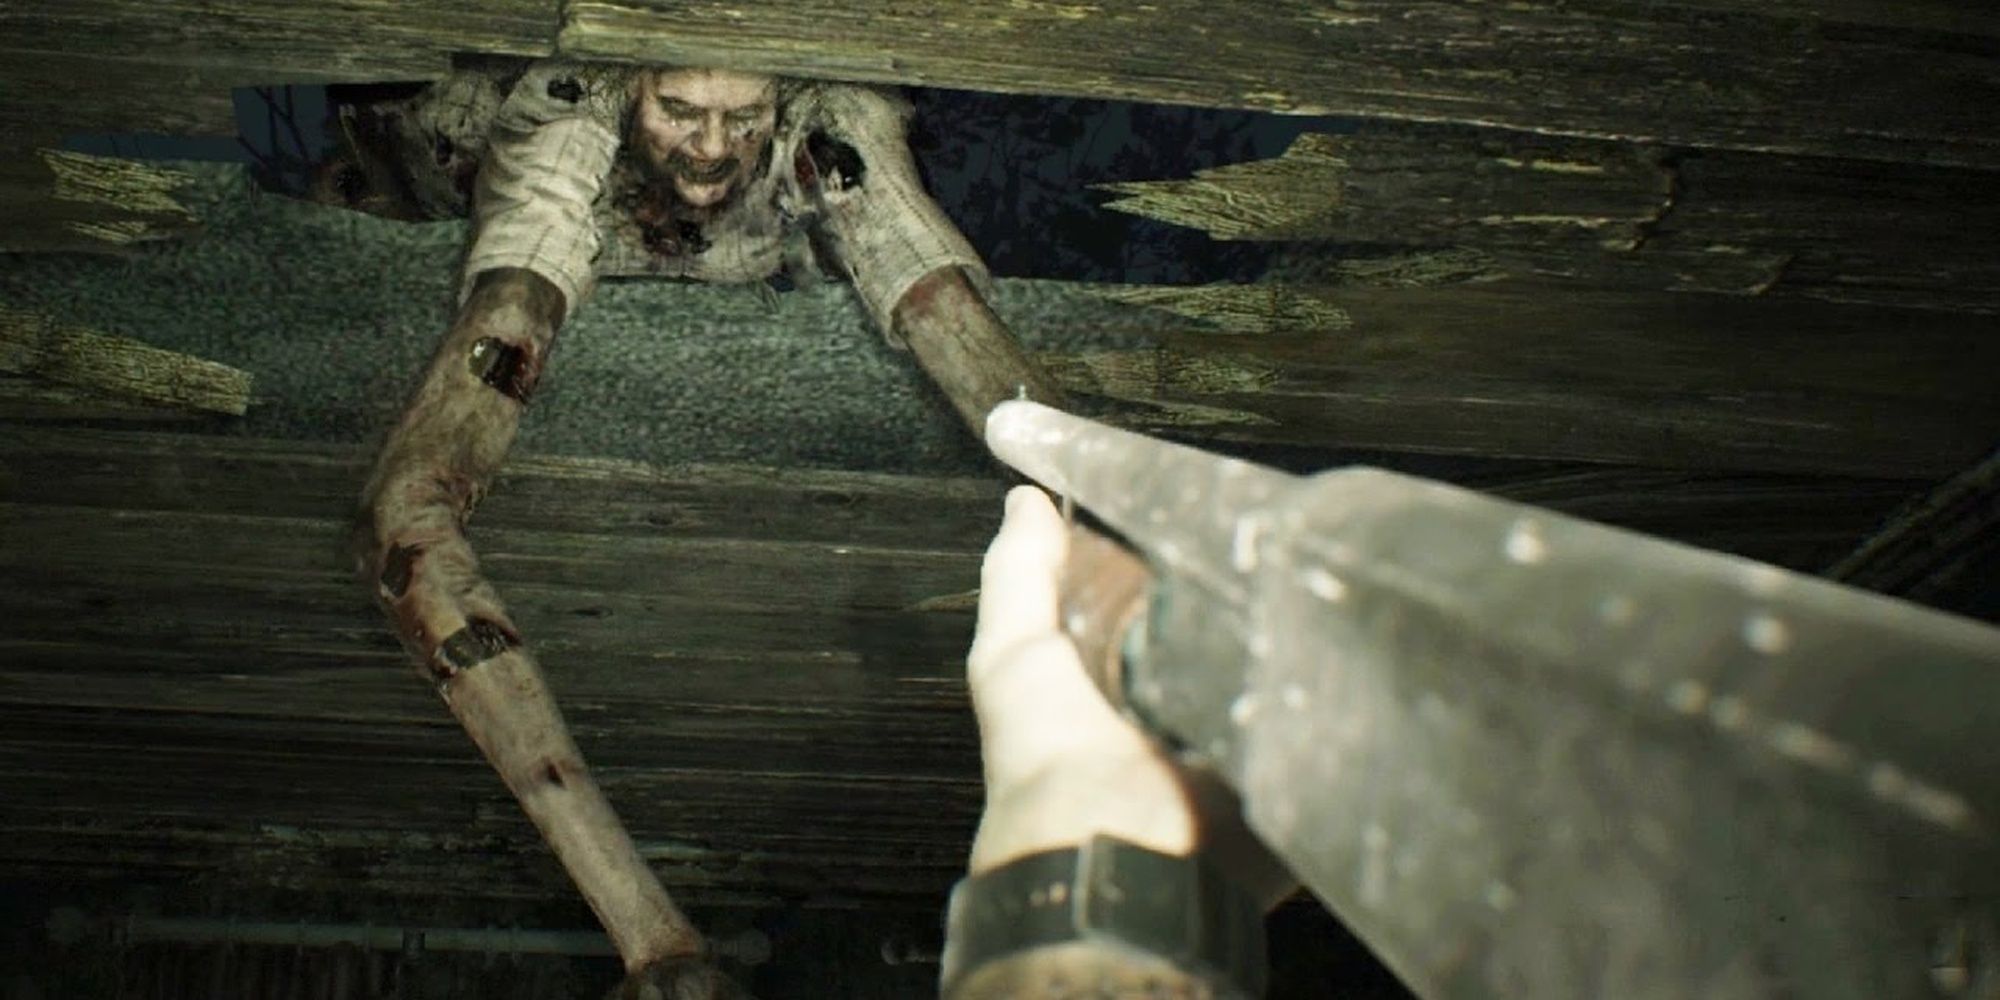 Marguerite Reaching through a wall at Ethan Resident Evil 7